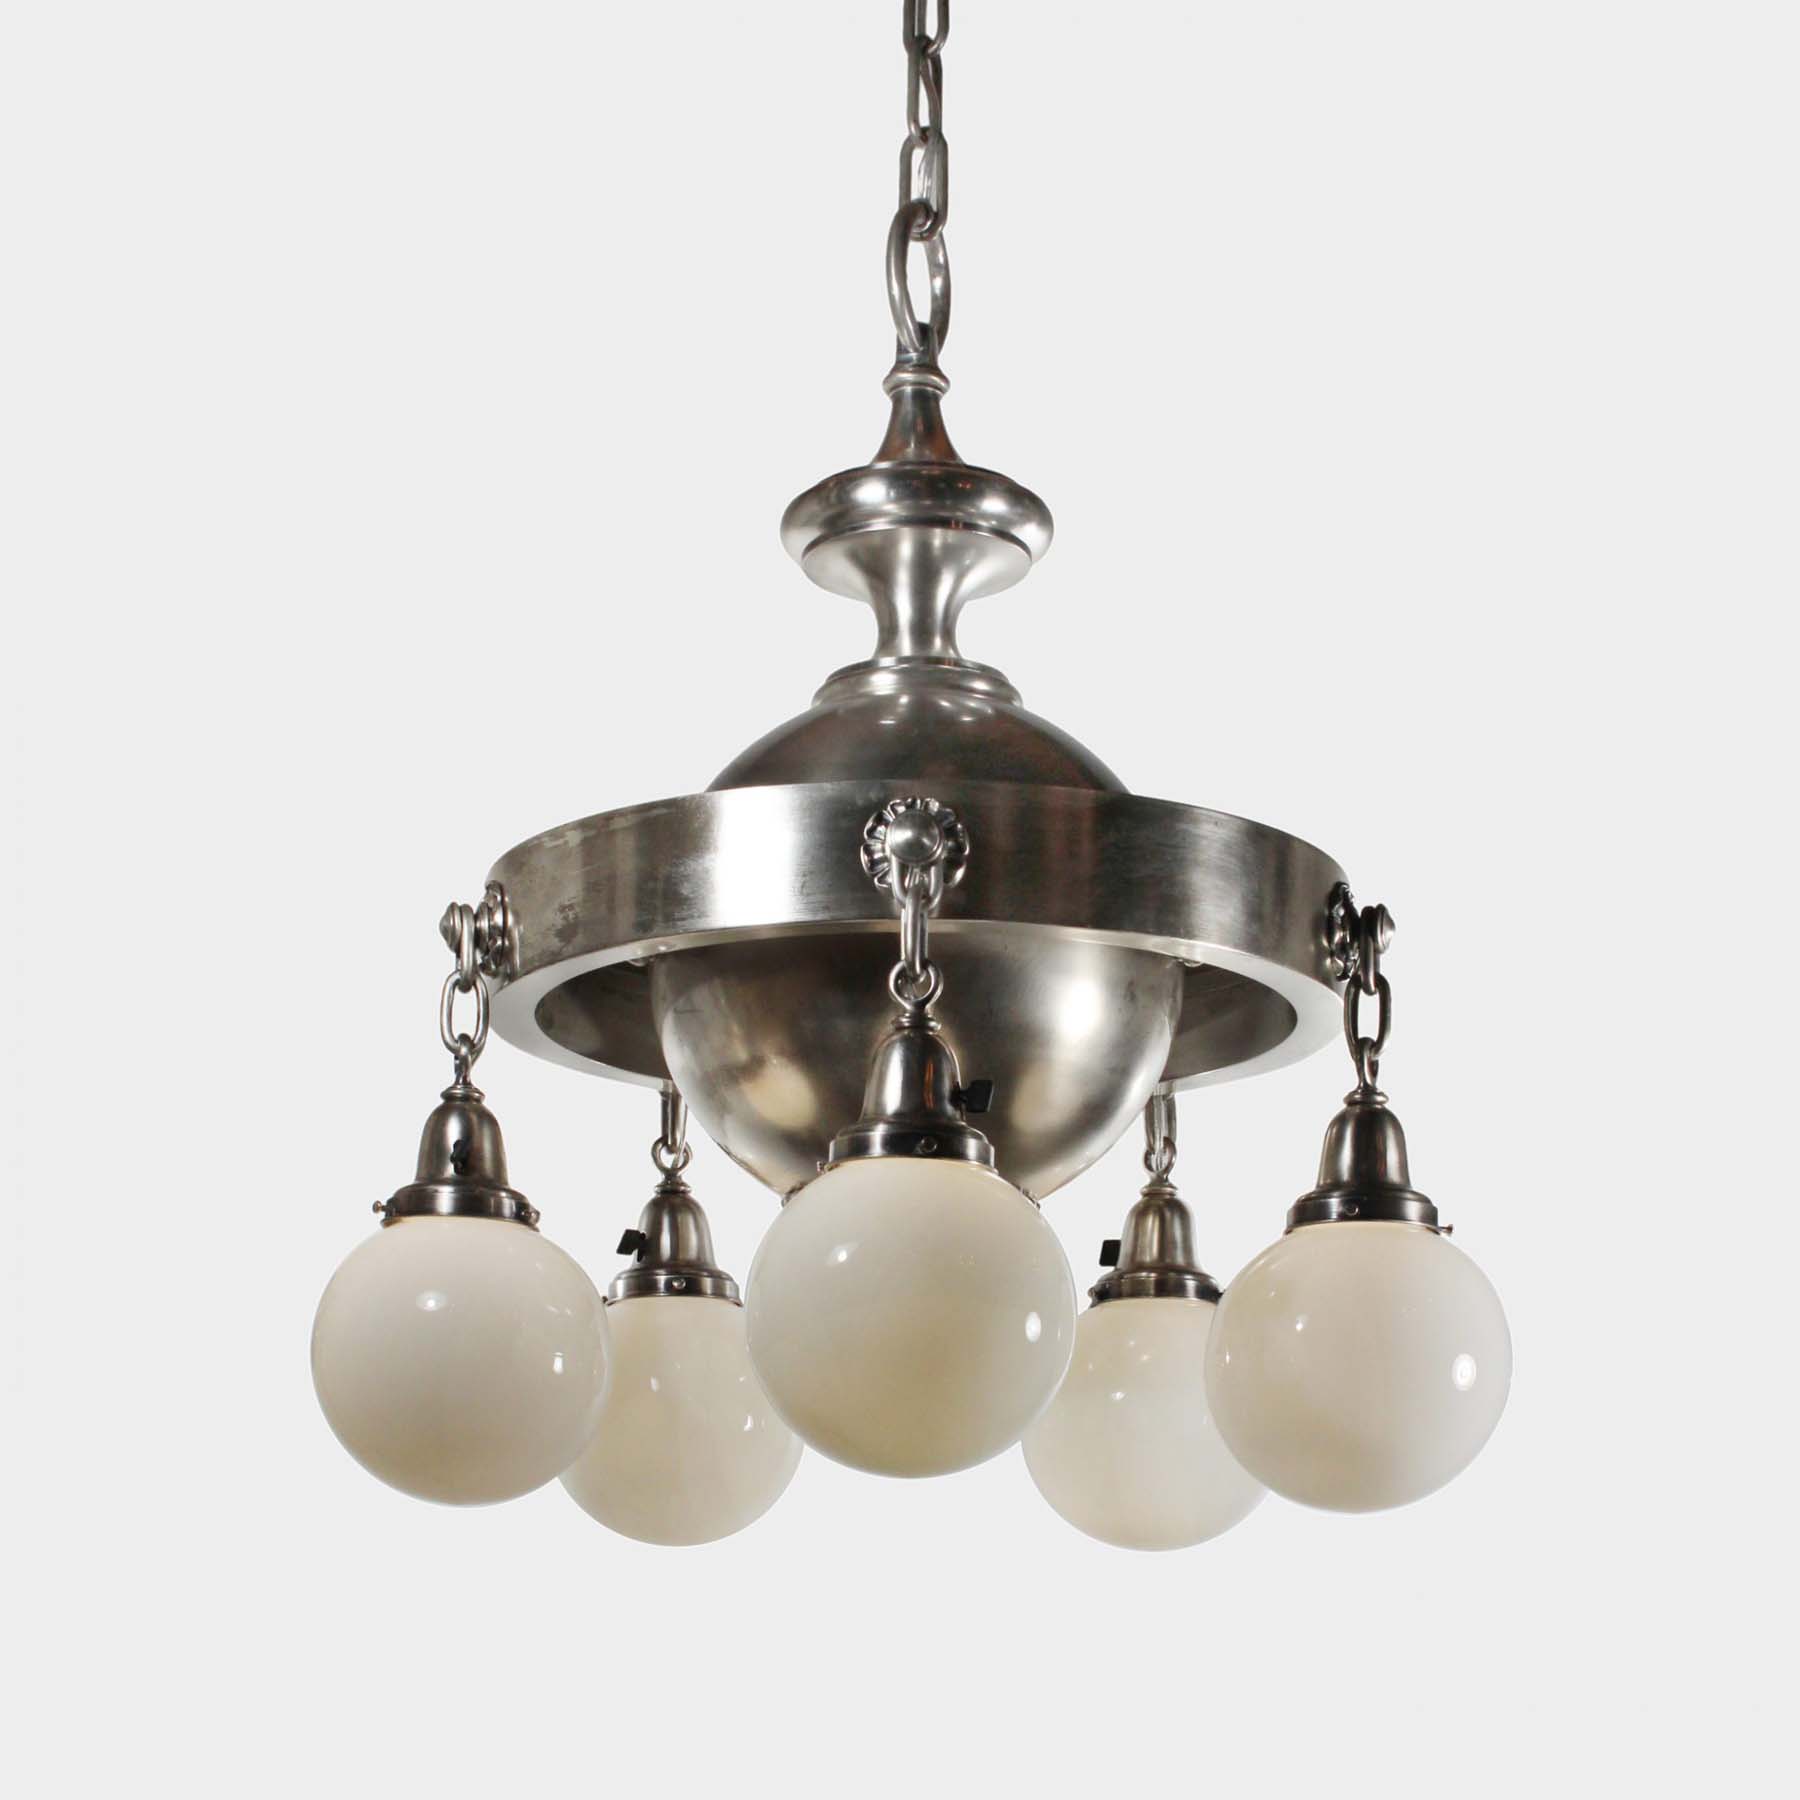 SOLD Substantial Antique Silver Plated Chandelier with Ball Shades-69822